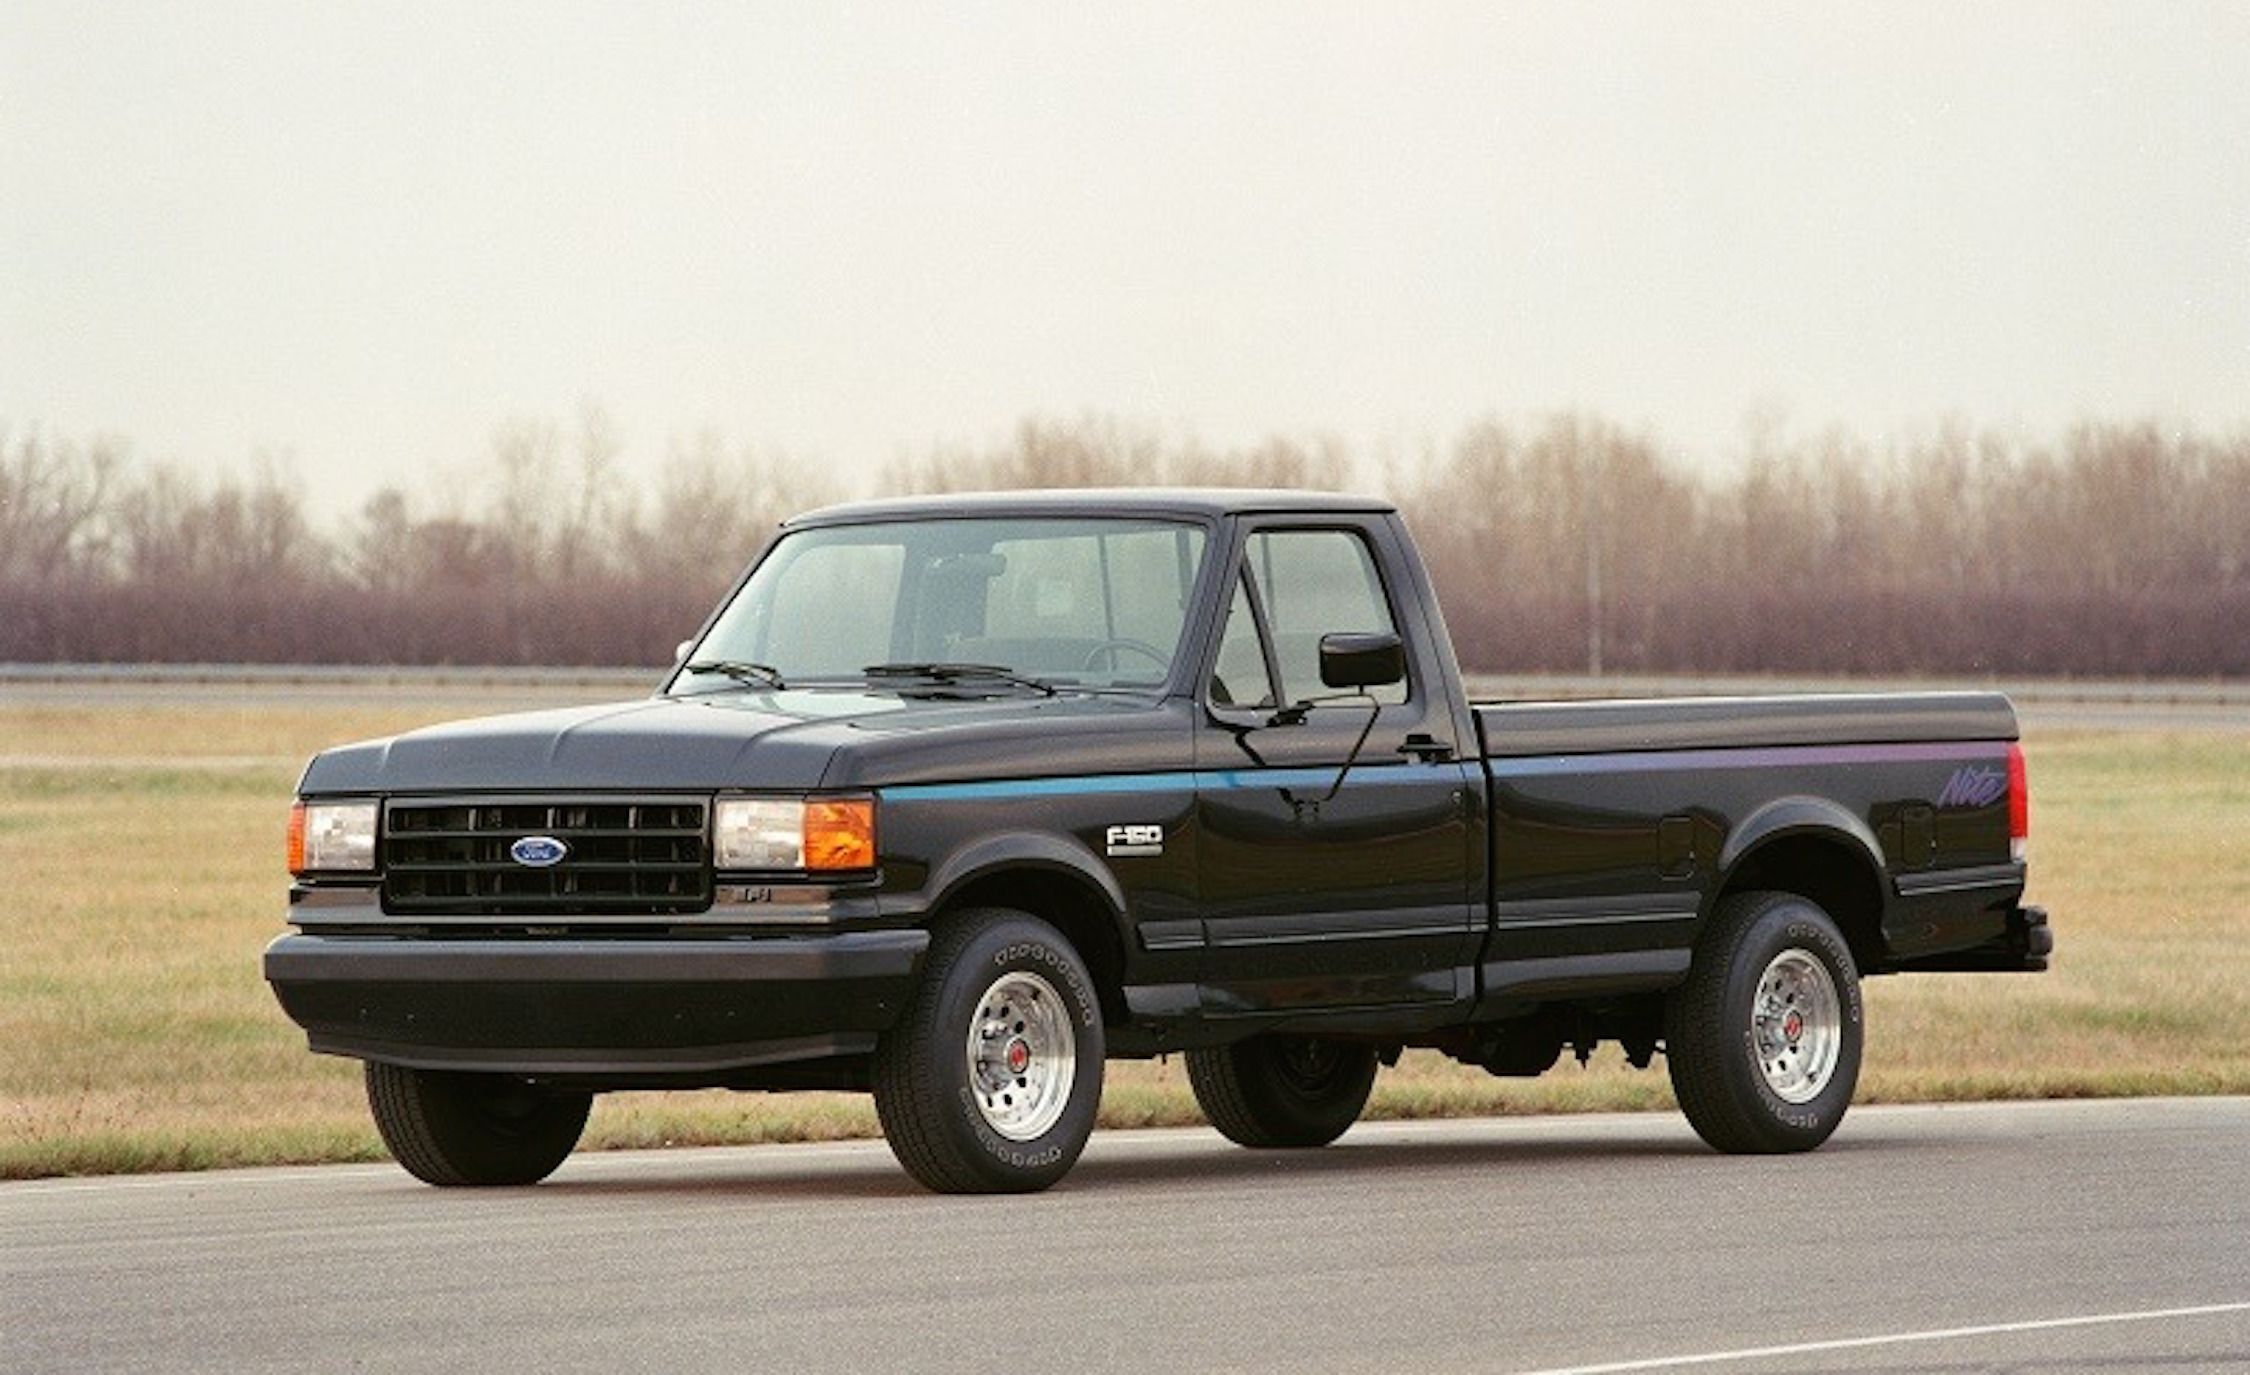 Ford's F-Series Pickup Truck History, from the Model TT to Today